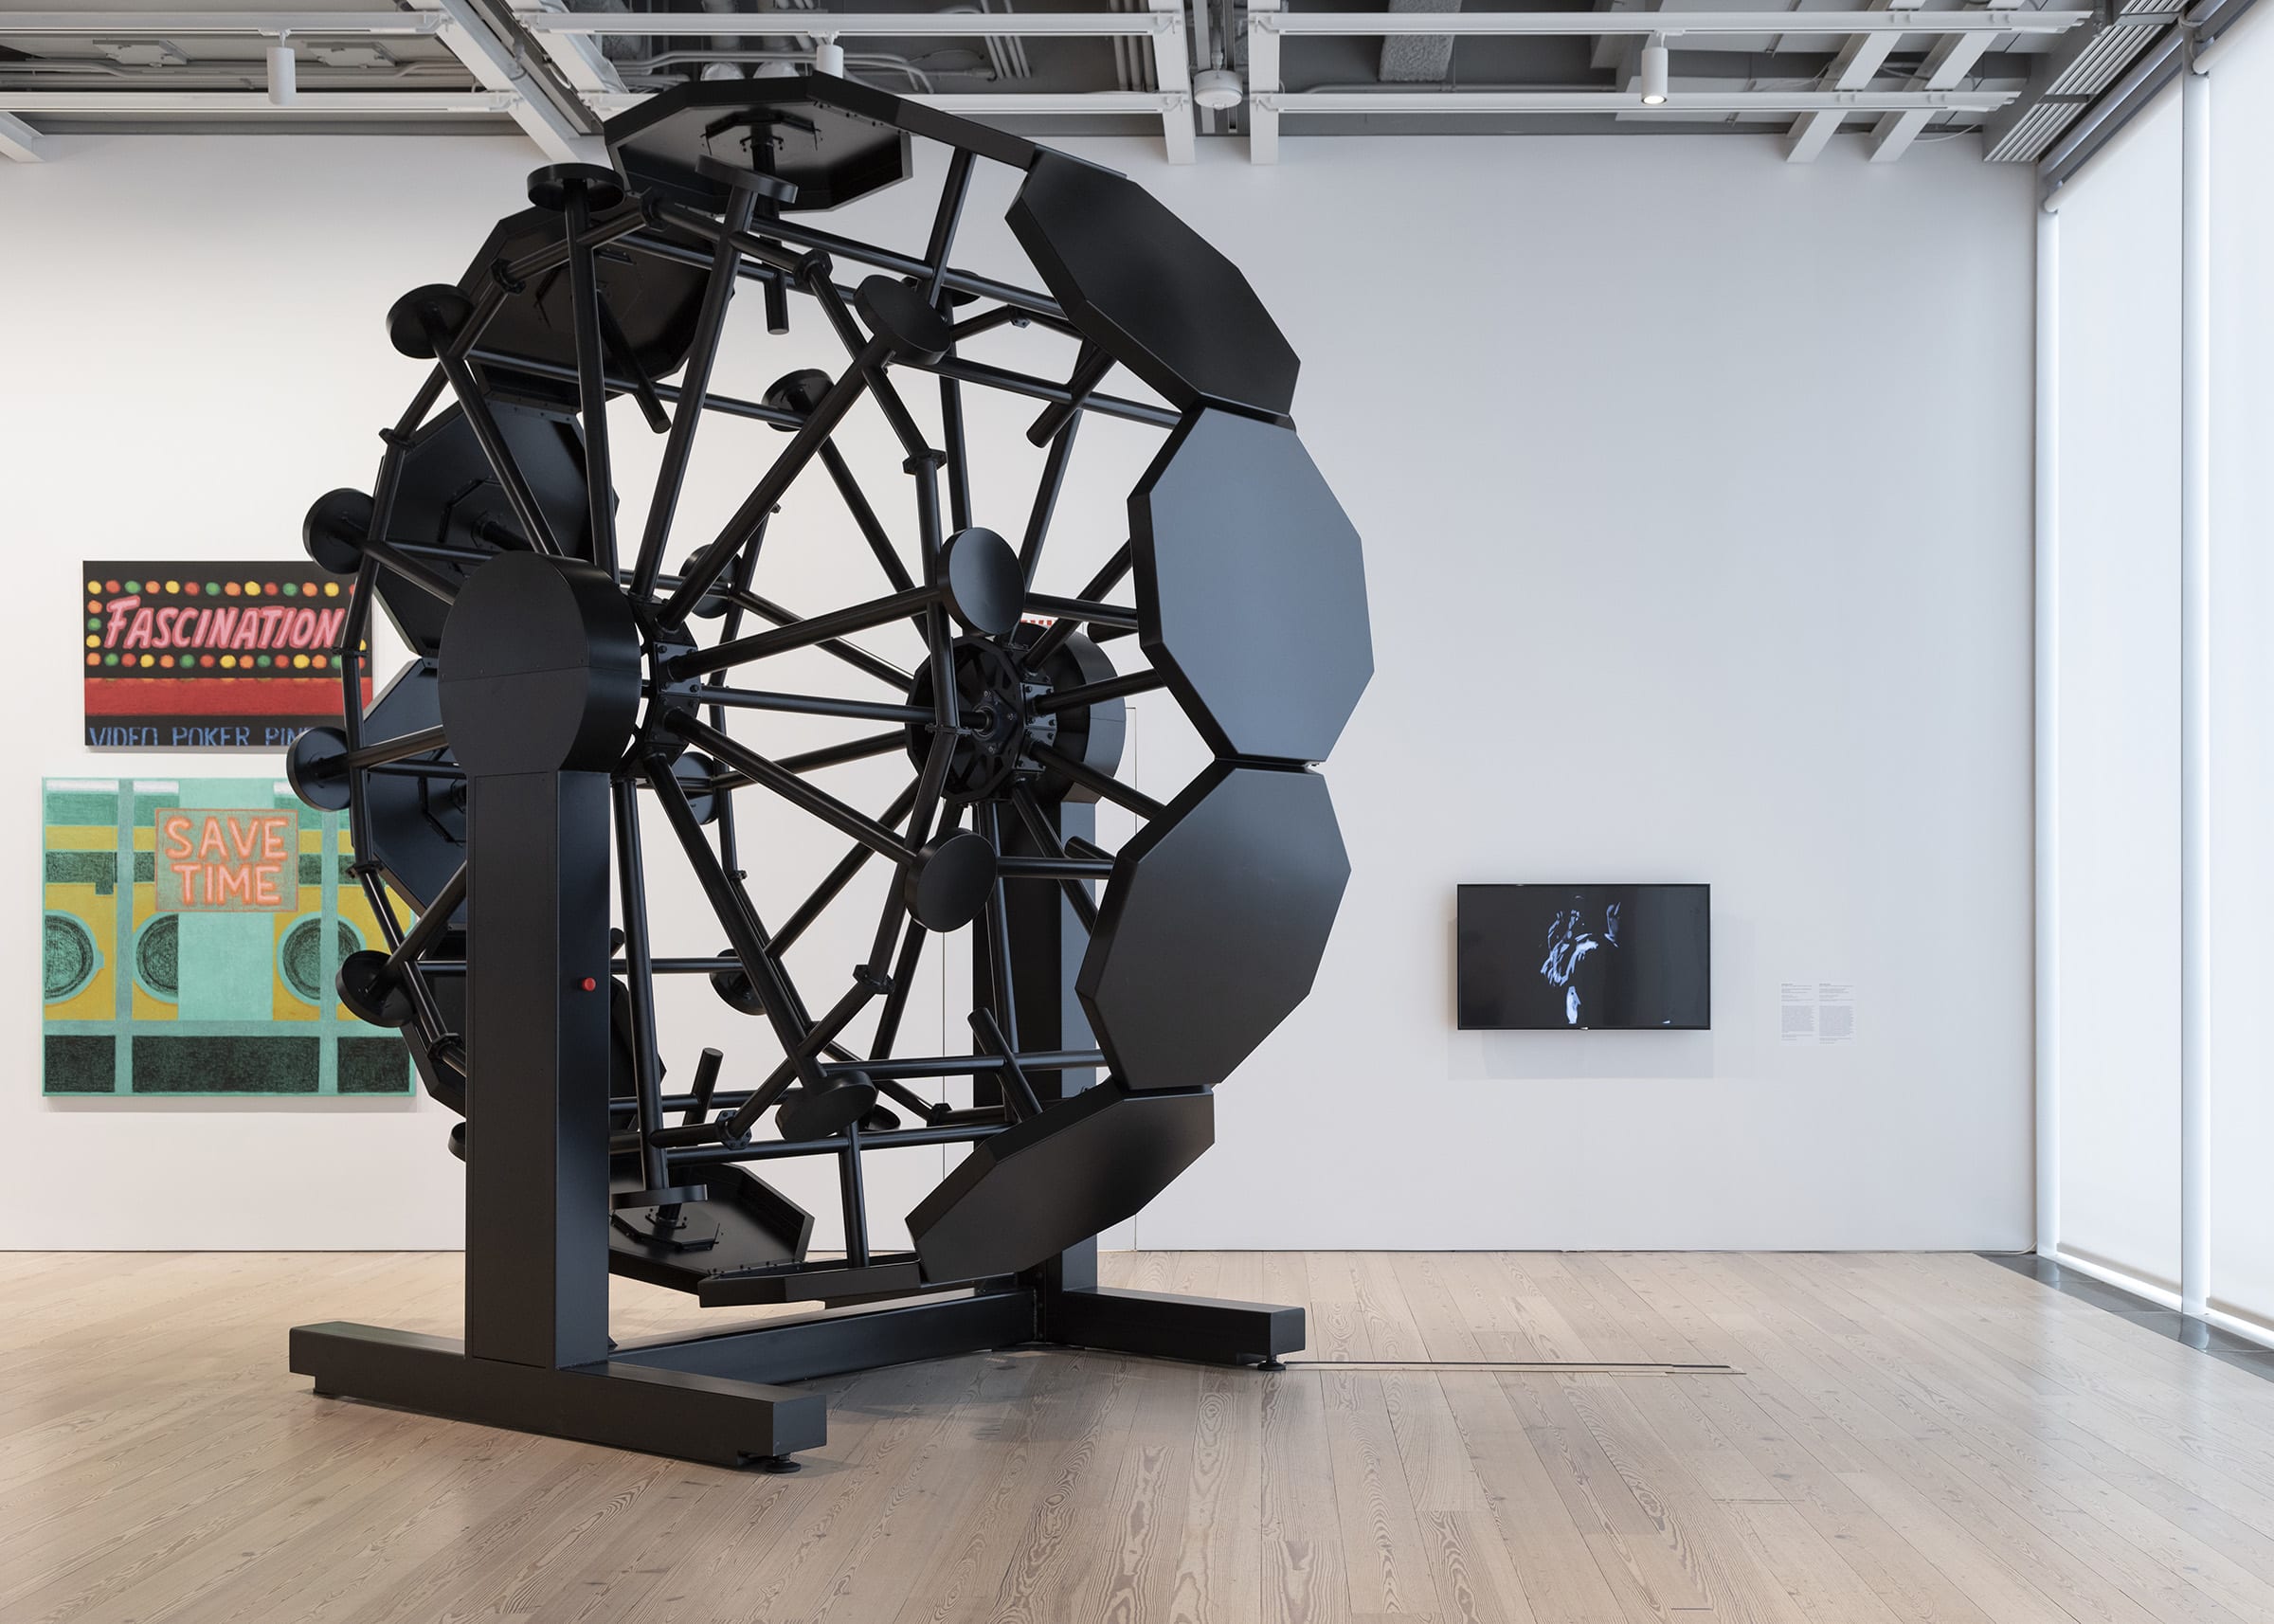 Sable Elyse Smith, A Clockwork, 2021. Installation view in the Whitney Biennial 2022. Courtesy of the artist; JTT, New York; Regen Projects, Los Angeles; and Carlos/Ishikawa, London. Photo by Charles Benton.